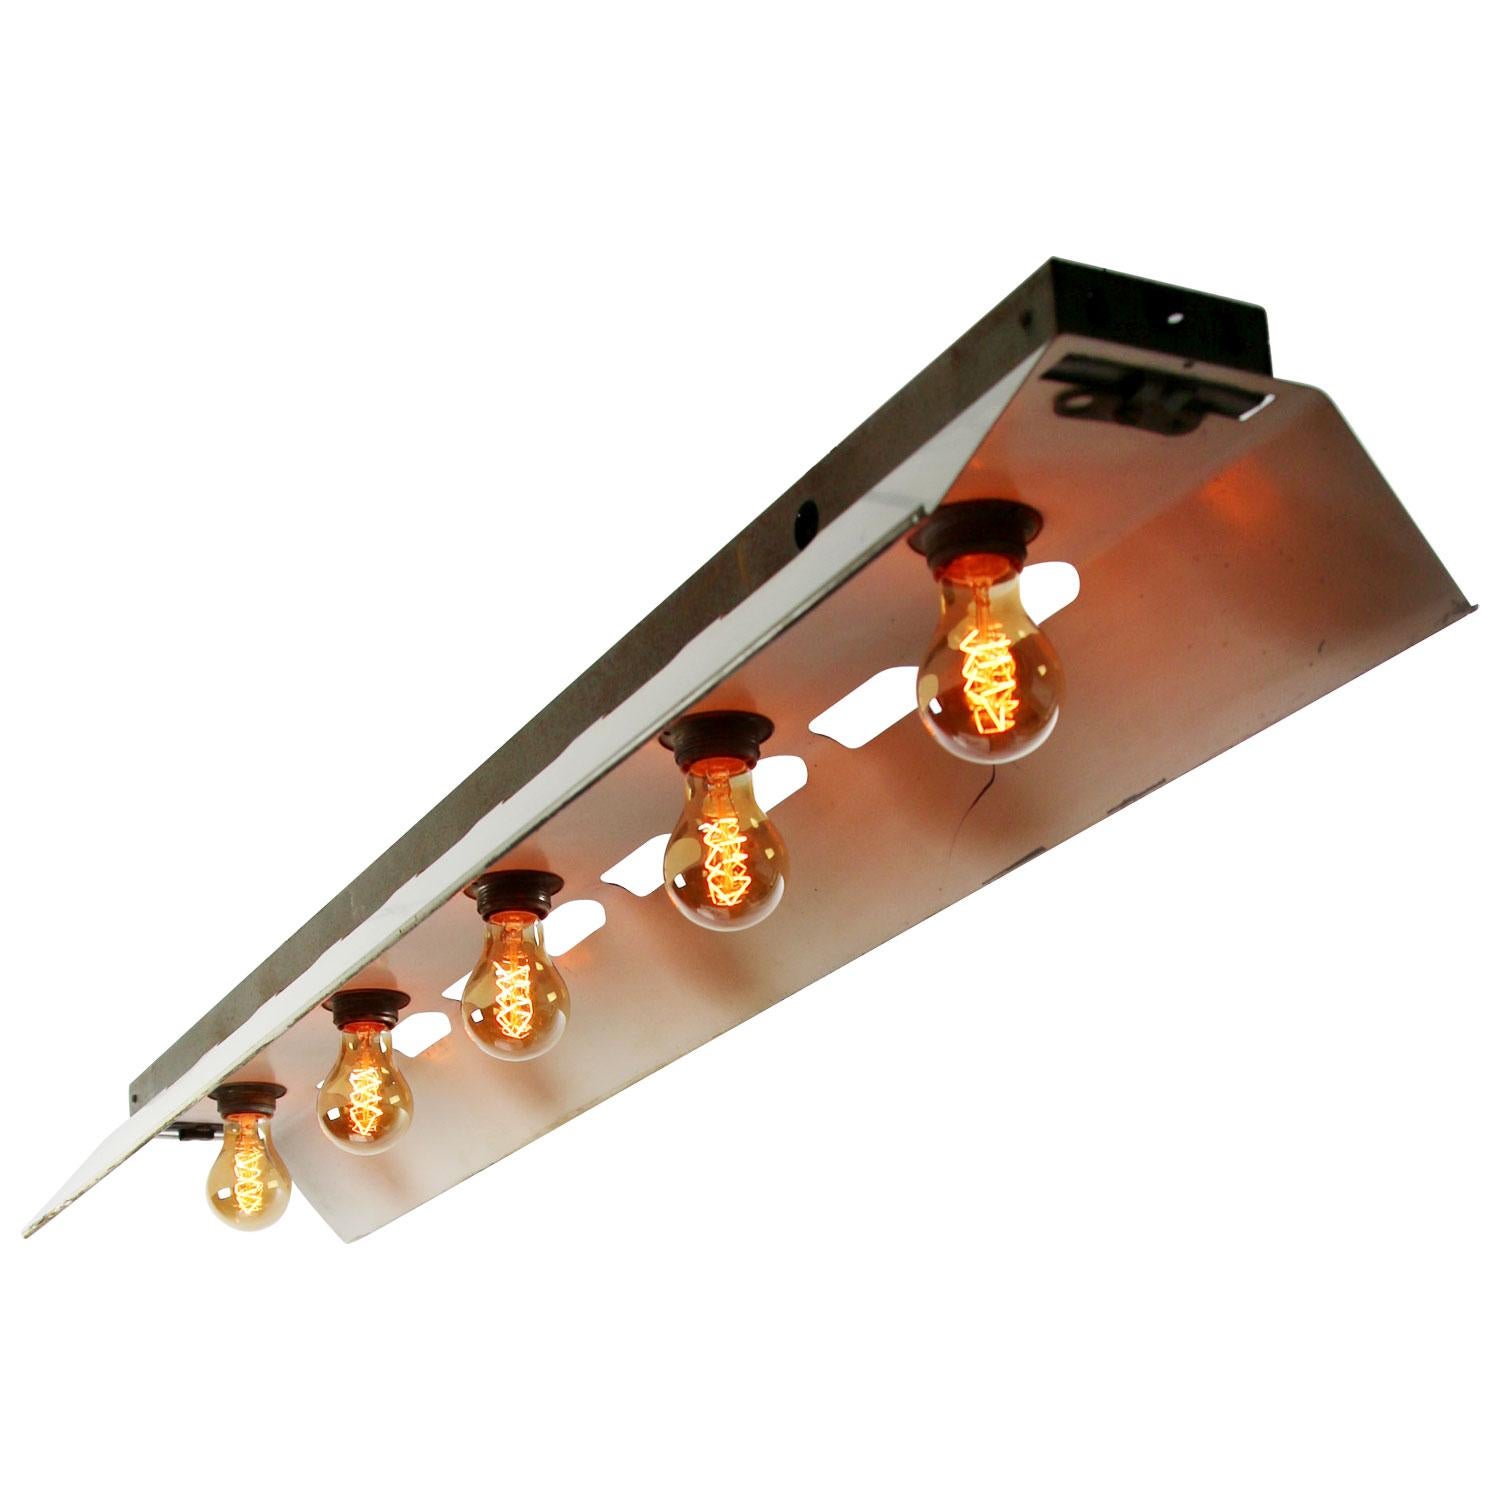 Industrial metal light
Suitable for 5x bulbs

Weight: 4.00 kg / 8.8 lb
 
Priced per individual item. All lamps have been made suitable by international standards for incandescent light bulbs, energy-efficient and LED bulbs. E26/E27 bulb holders and